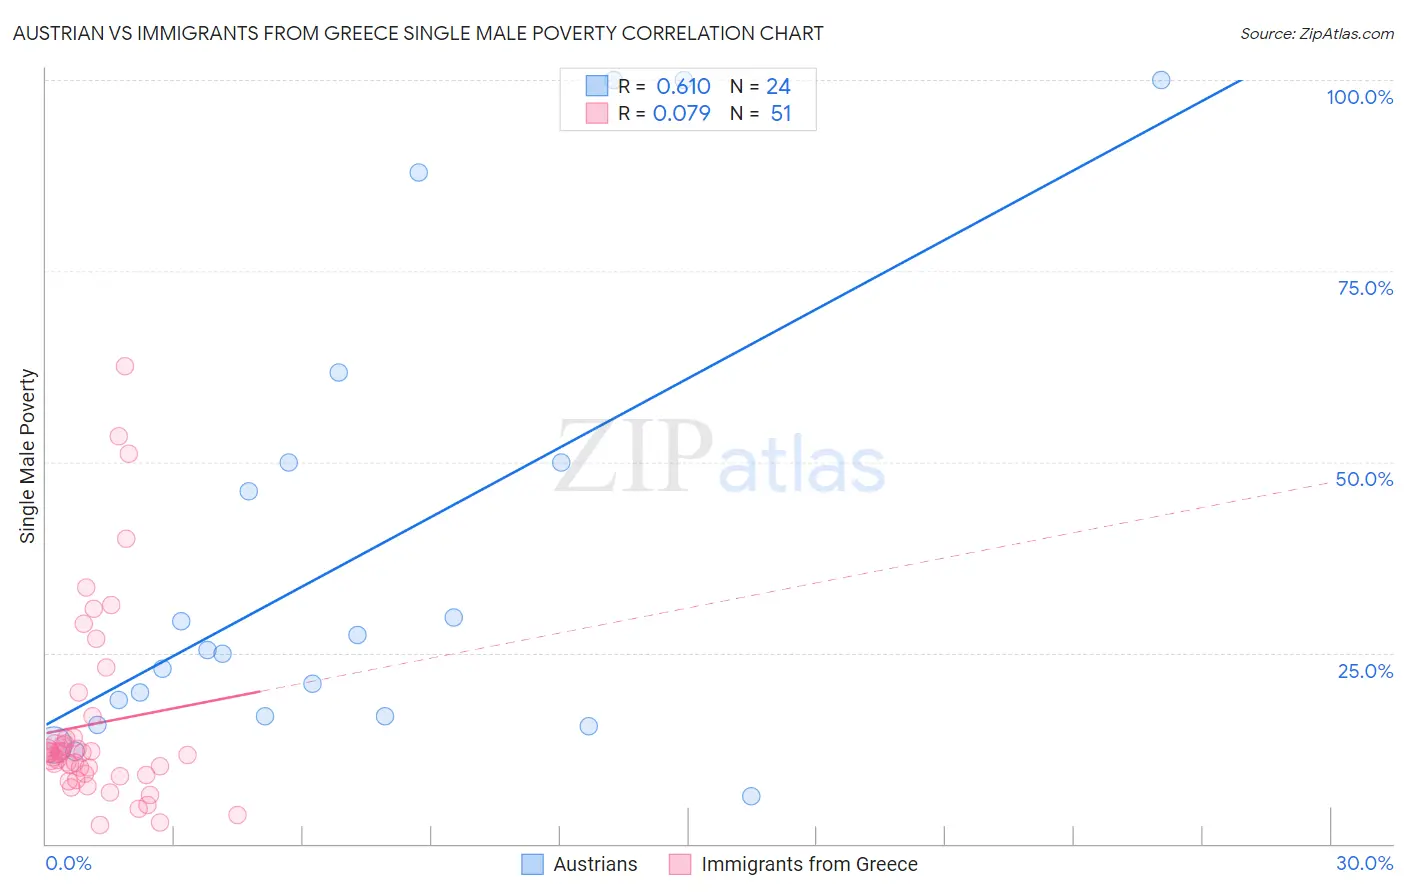 Austrian vs Immigrants from Greece Single Male Poverty